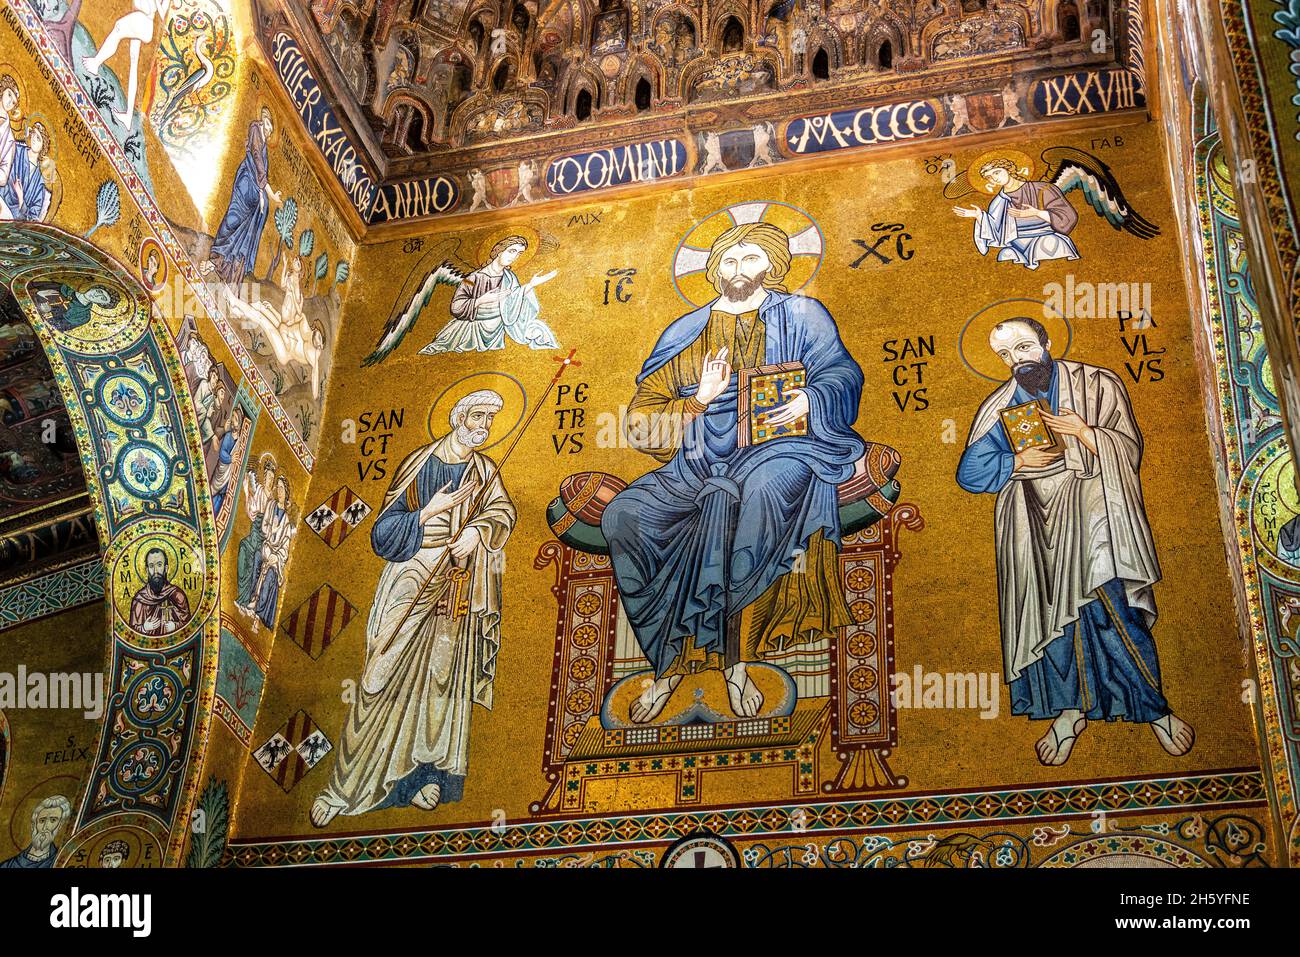 PALERMO, ITALY- APRIL 29, 2018: Interior view of the Palatine Chapel in Palermo, Italy Stock Photo